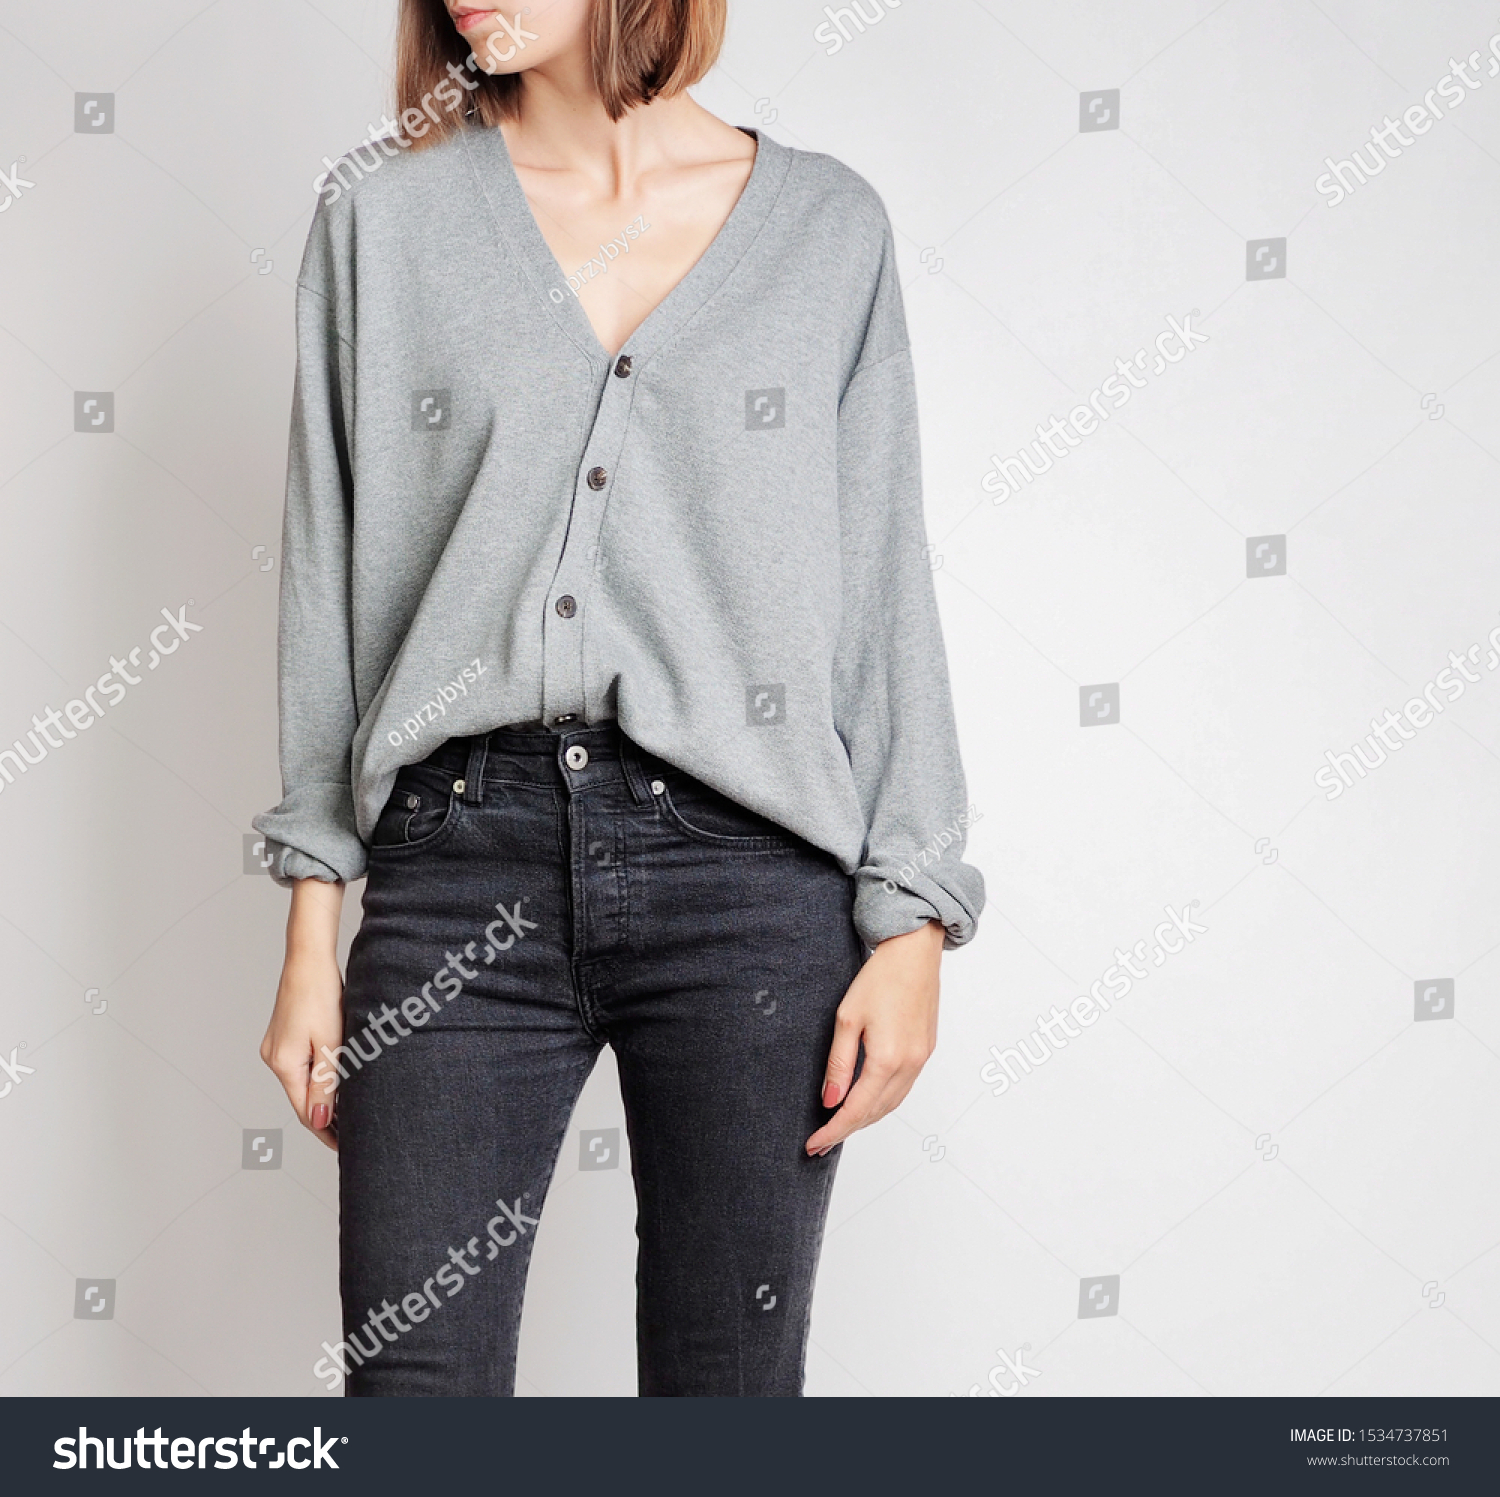 Young woman wearing simple outfit with grey button-up cardigan and black trousers isolated on light grey background. Copy space #1534737851